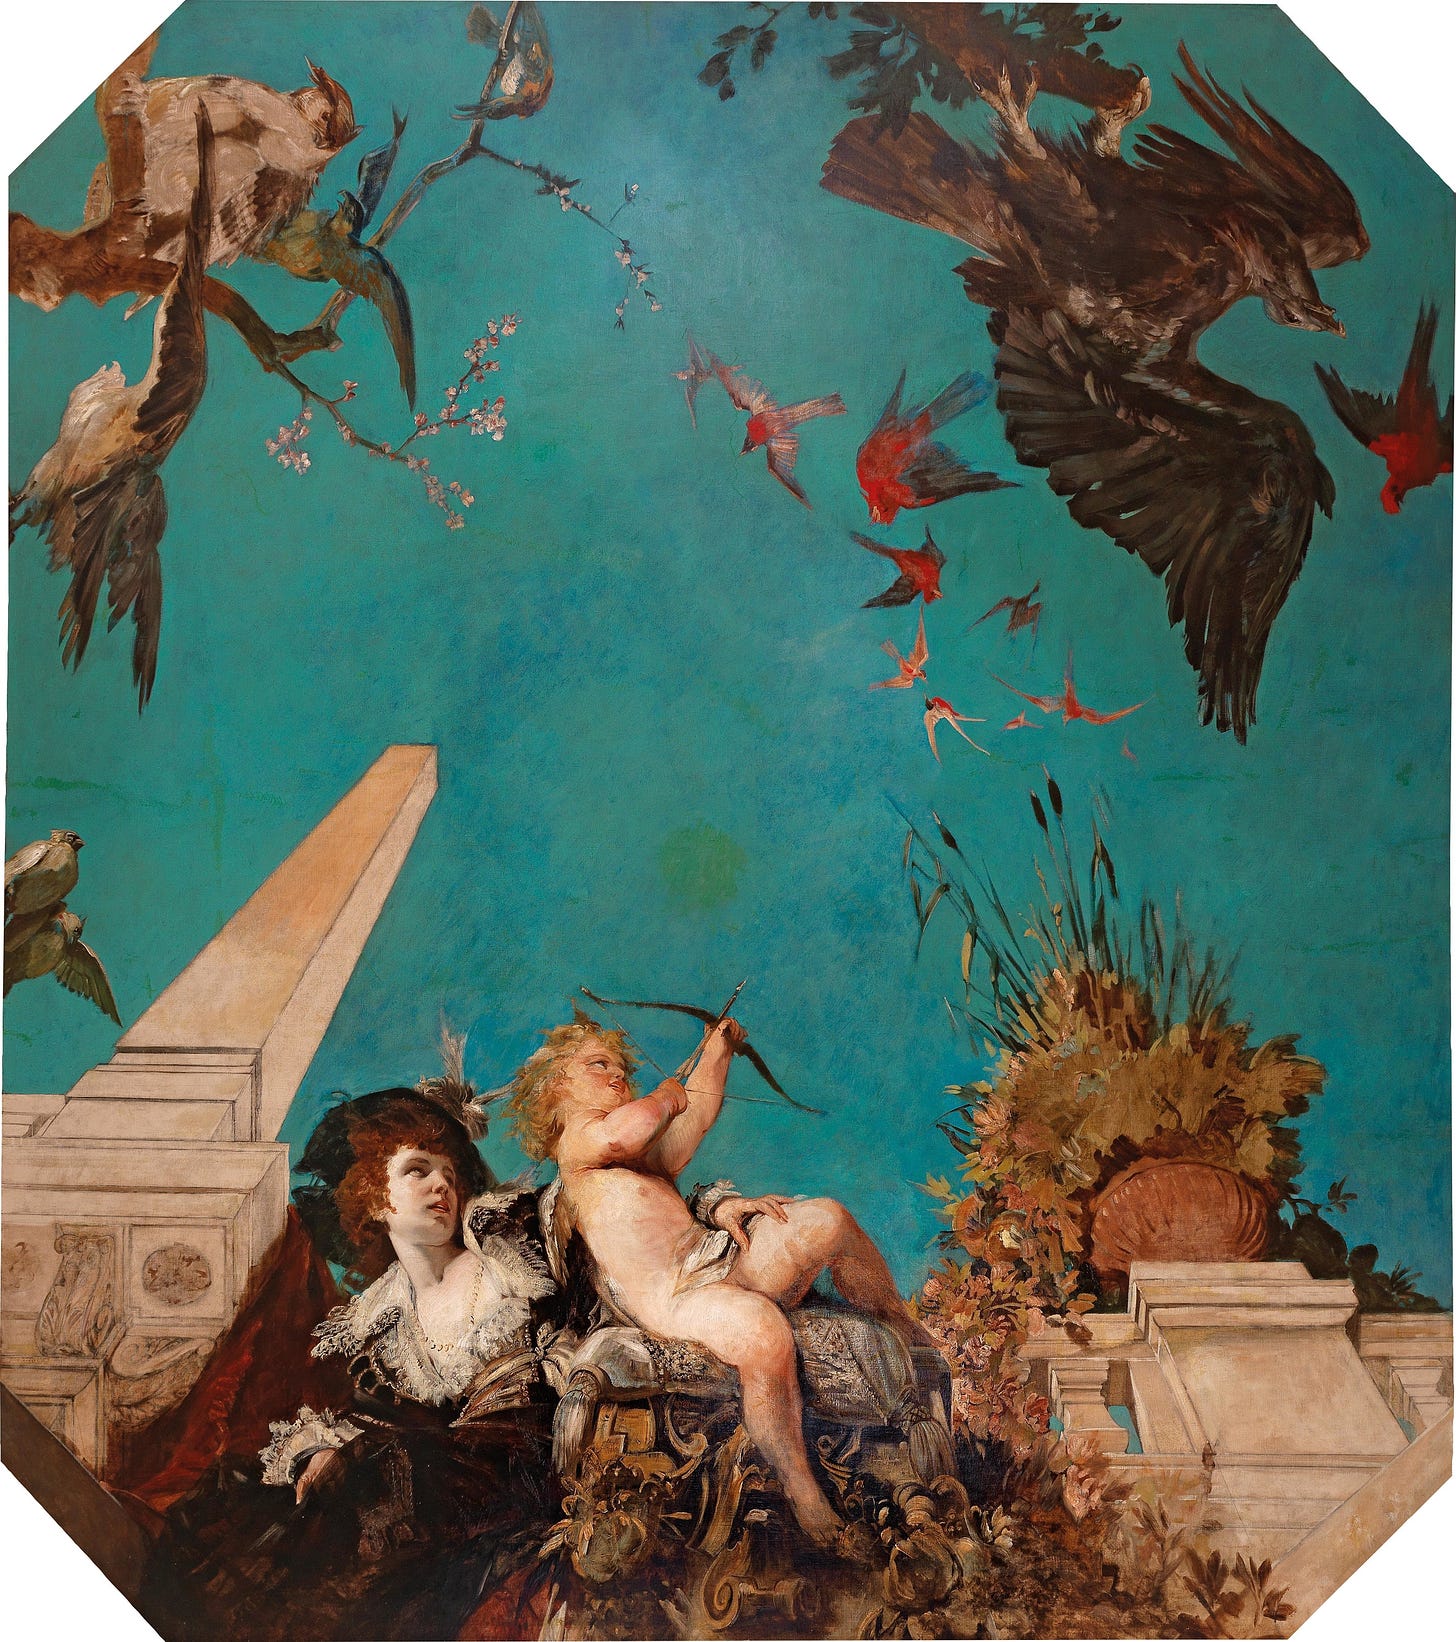 A Ceiling Painting, Society Lady With Cupid In A Garden Landscape (C. 1877) by Hans Makart